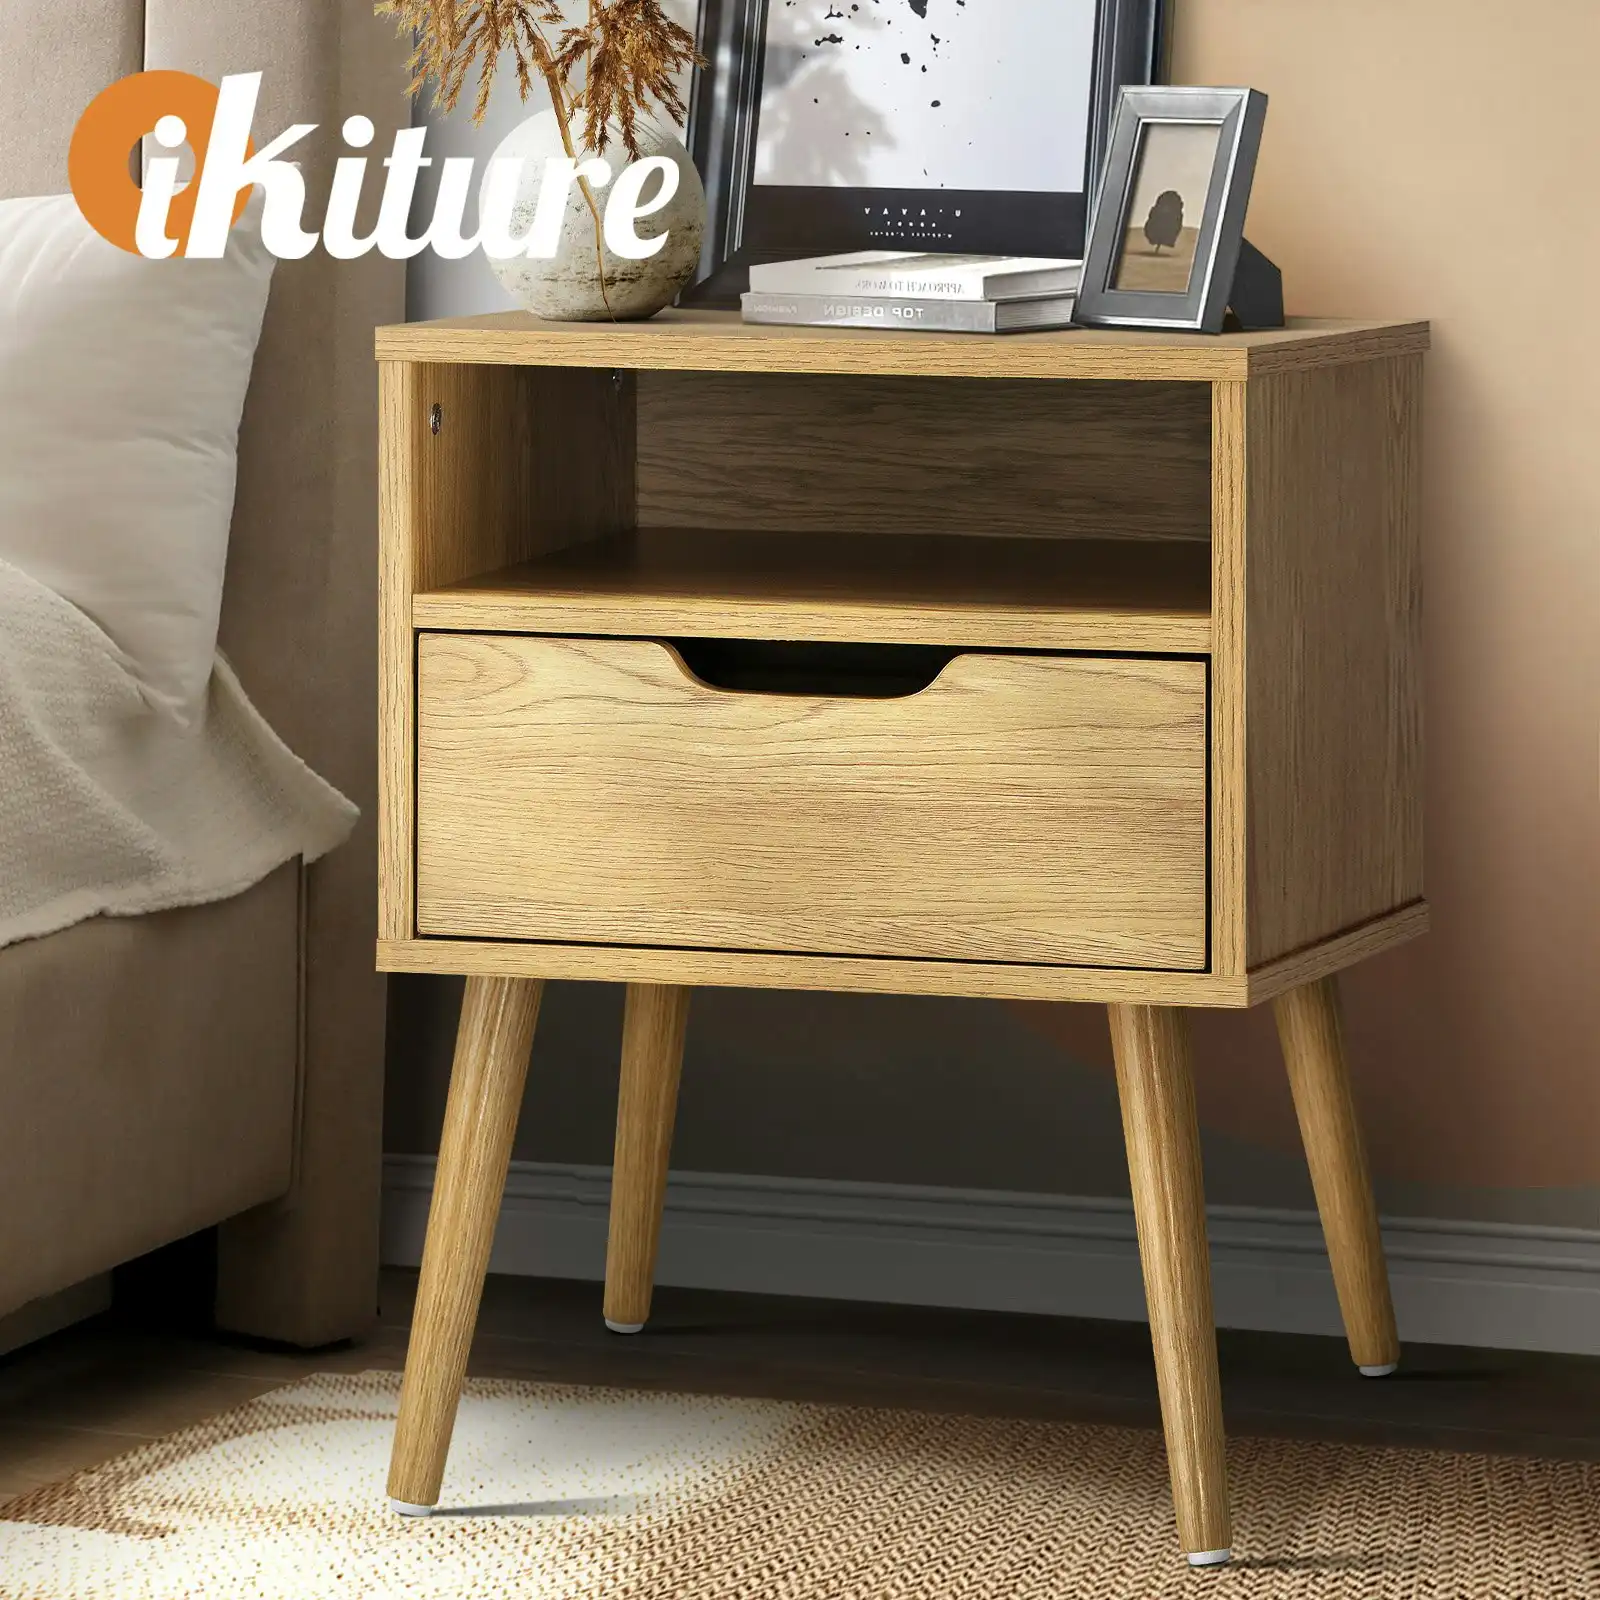 Oikiture Bedside Table Drawers Side Tables Nightstand Bedroom Cabinet Wood